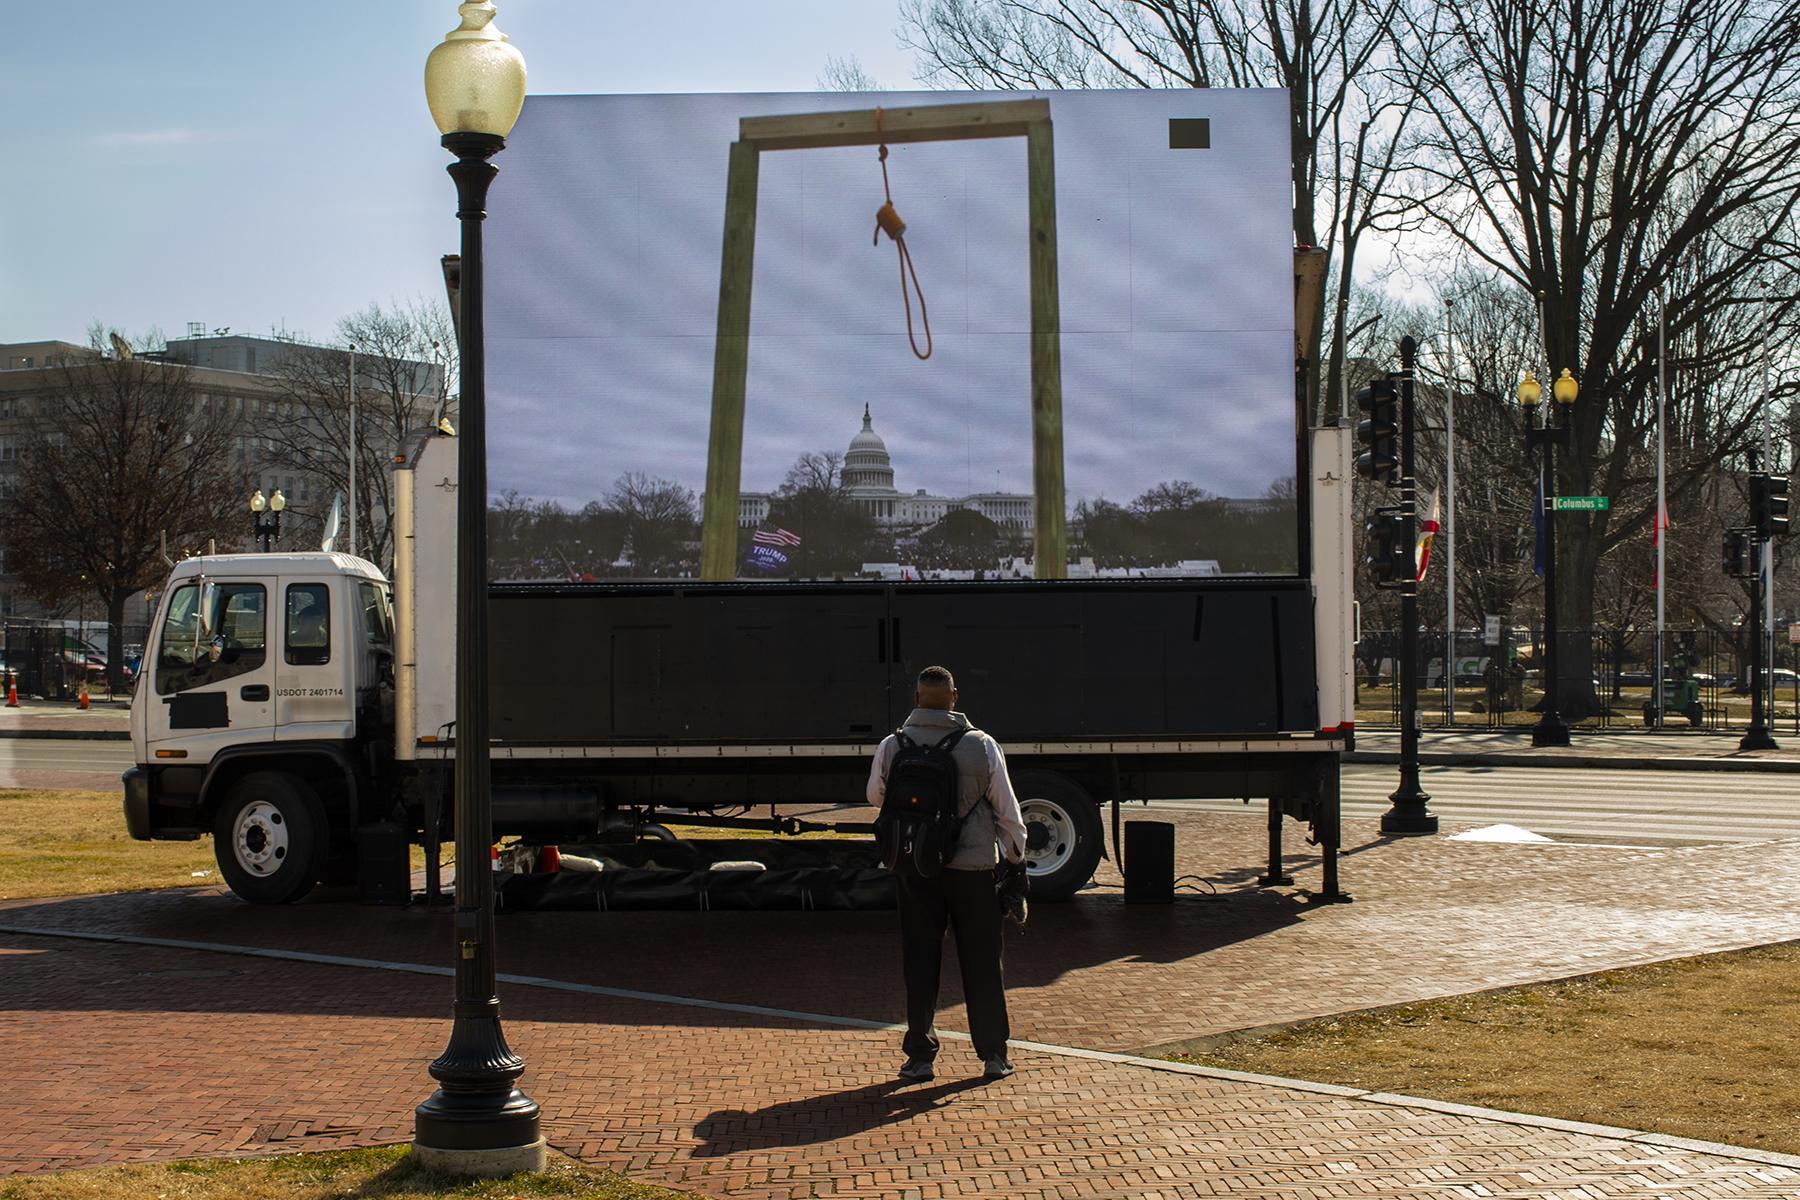 February 9, 2021, A sign truck is parked in front of Union Station, Washington D.C. on the first day of the Senate Impeachment Trial of former...